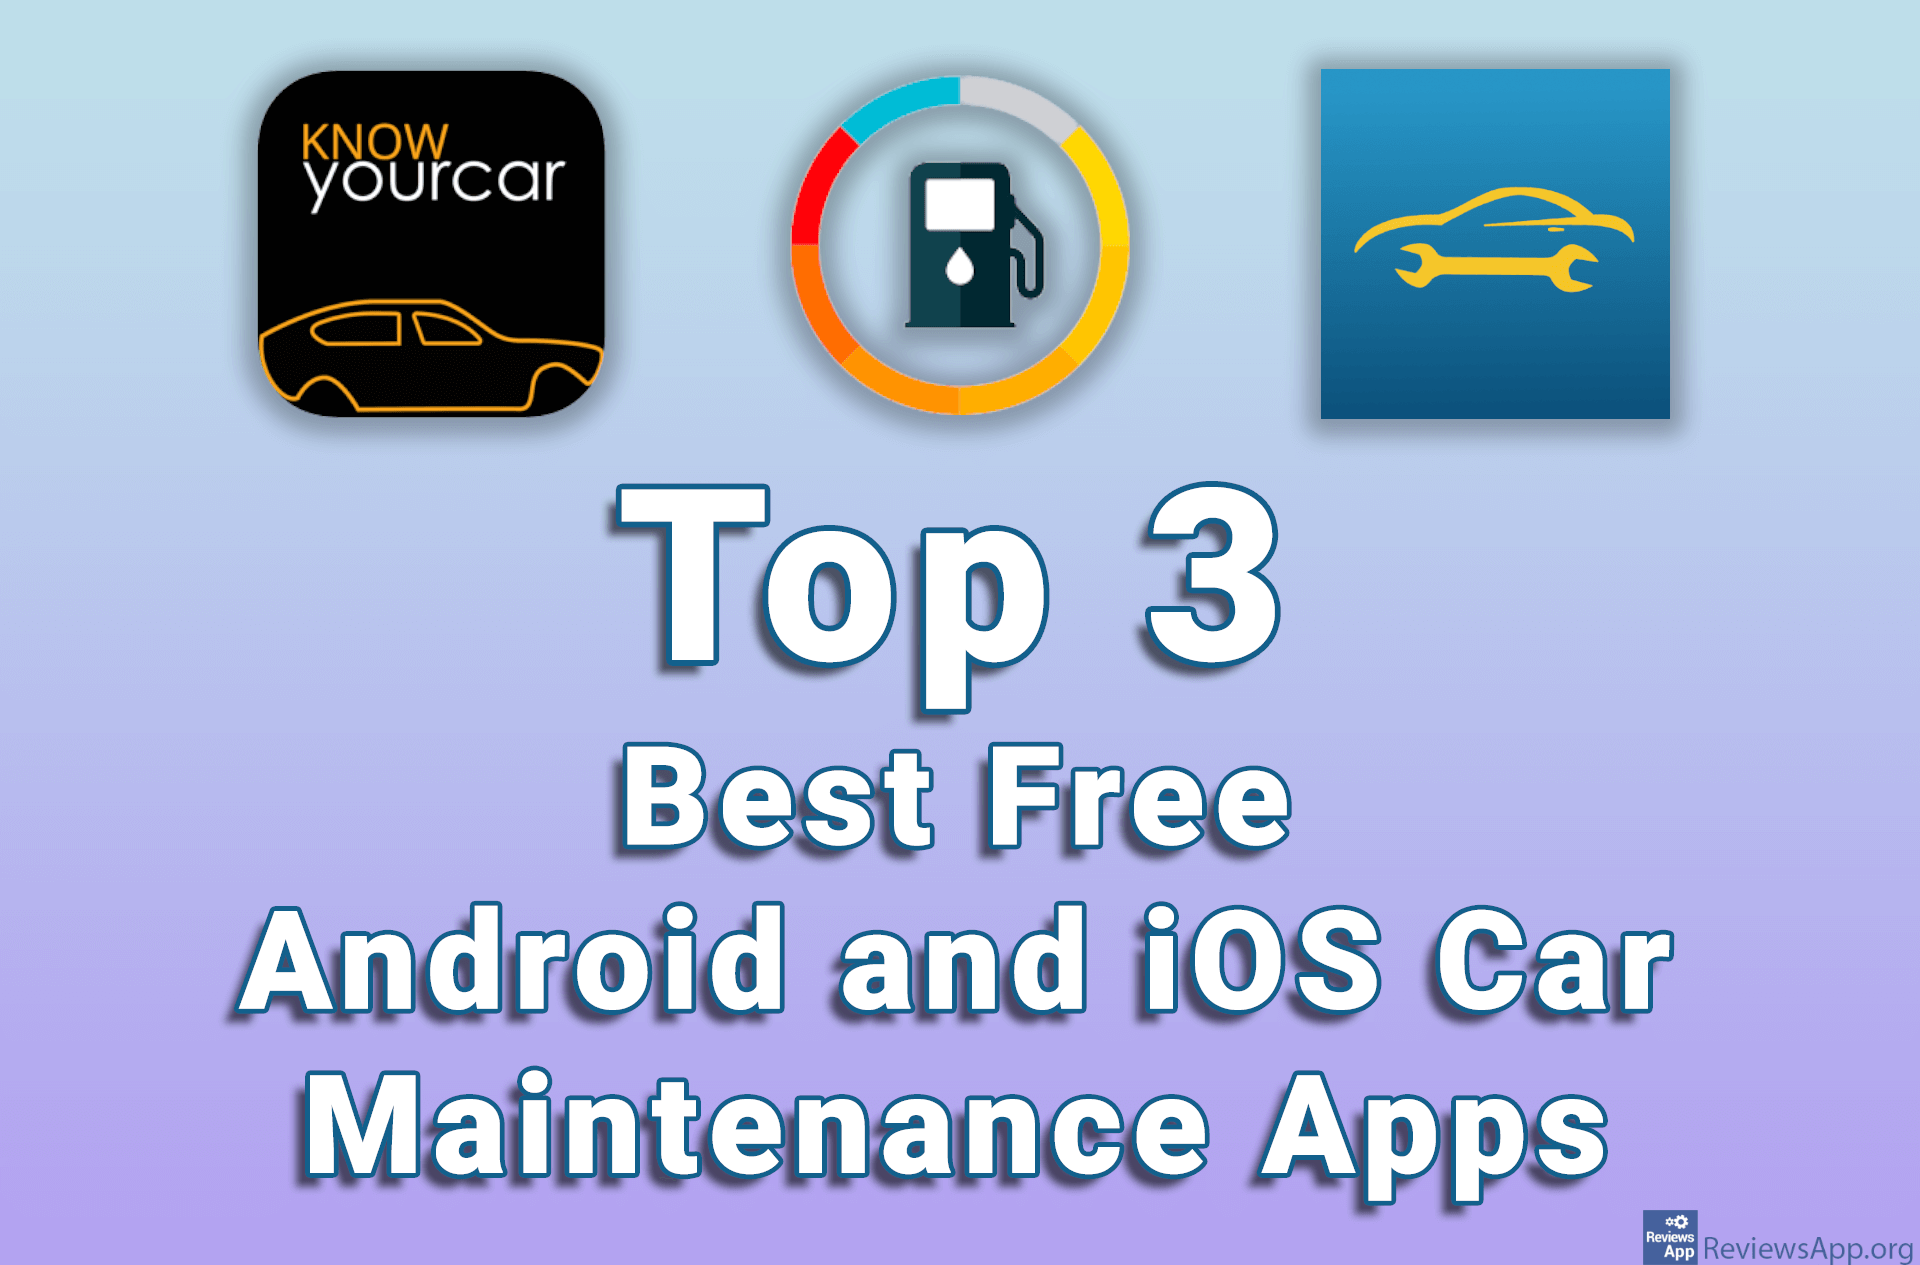 Top 3 Best Free Android and iOS Car Maintenance Apps